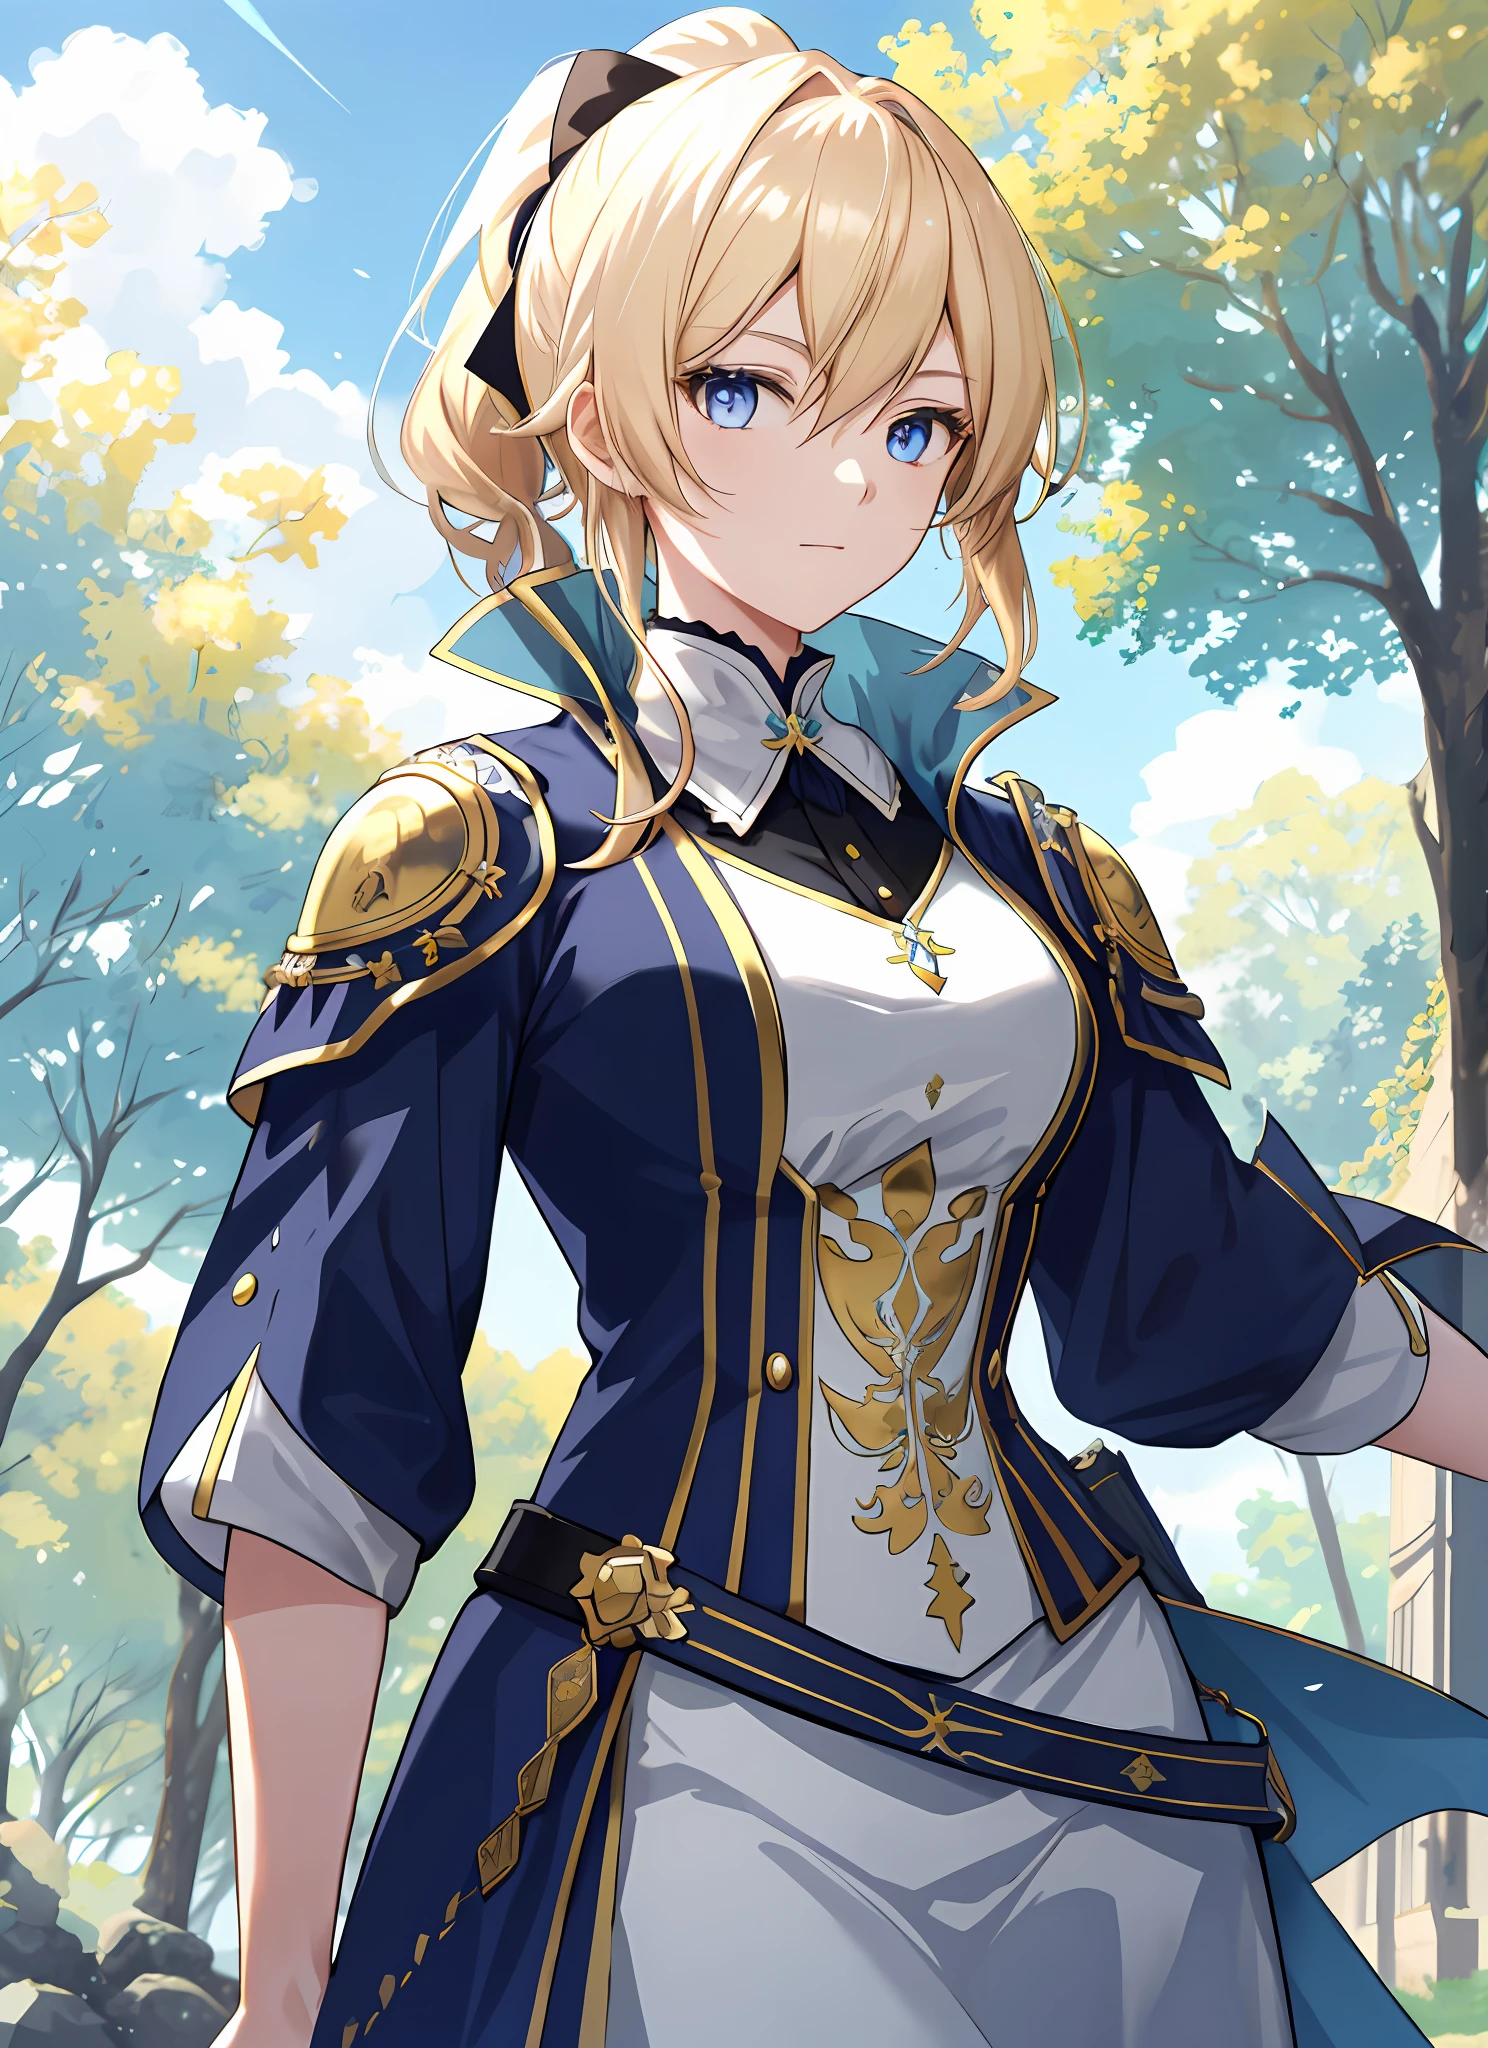 Elegant anime female characters, golden ponytail, extremely attractive eyes, medieval knight and aristocratic costumes, daytime, blue sky, sky, outdoors, under towering trees, cinematic lighting effects, large aperture portrait, dynamic pose, golden ratio, rich details